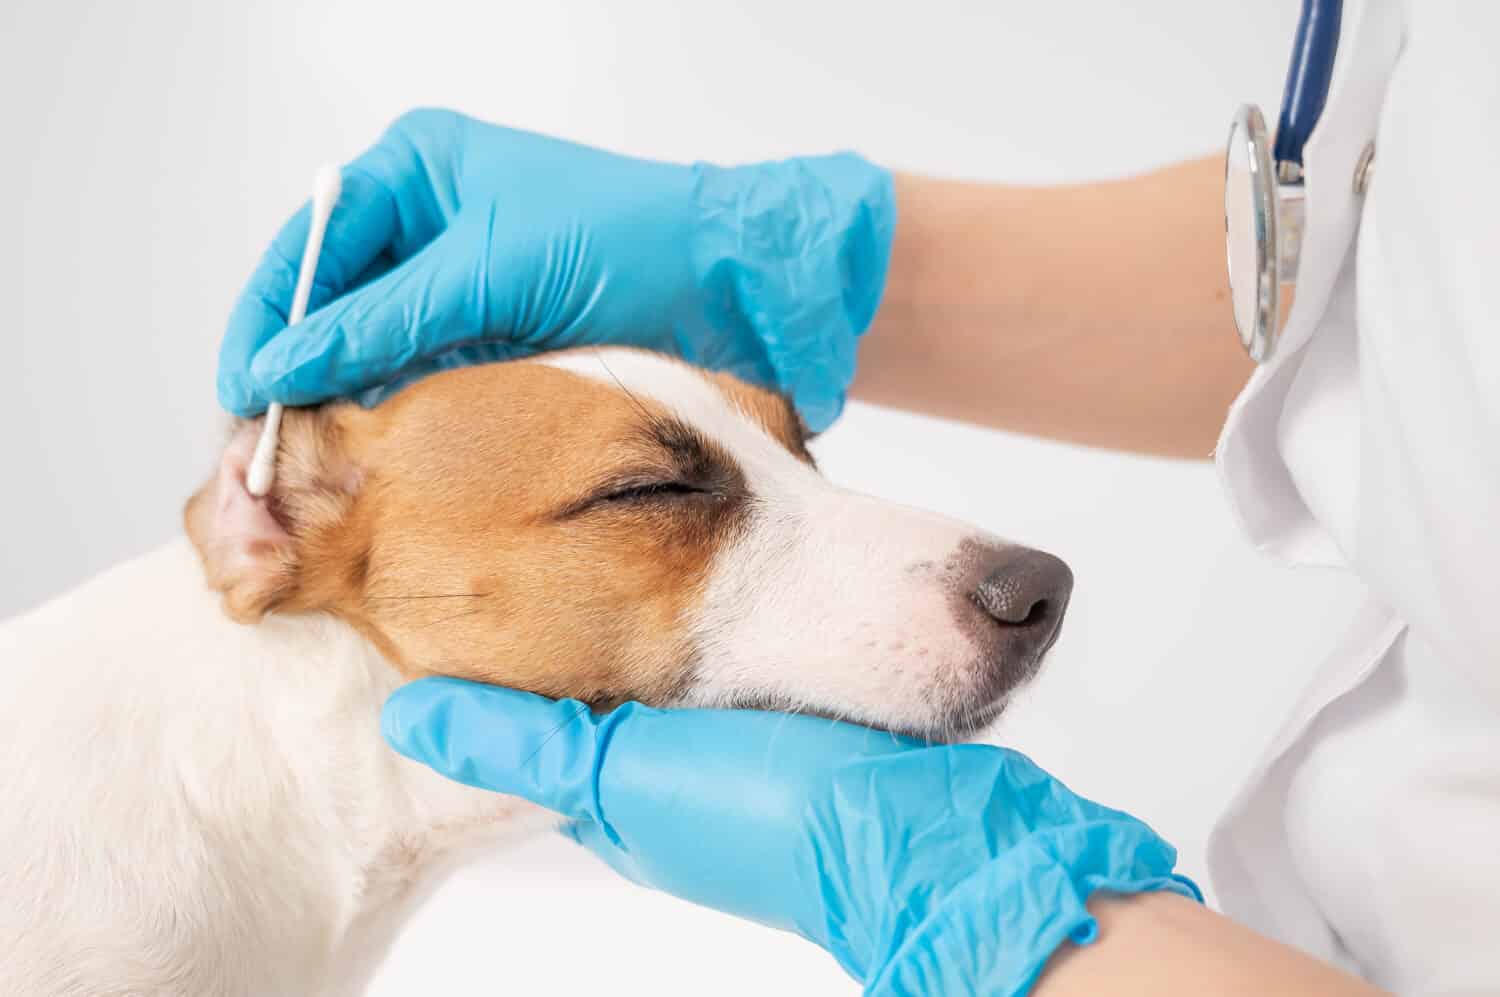 Vet cleans ears with a cotton swab to dog jack russell terrier on a white background.